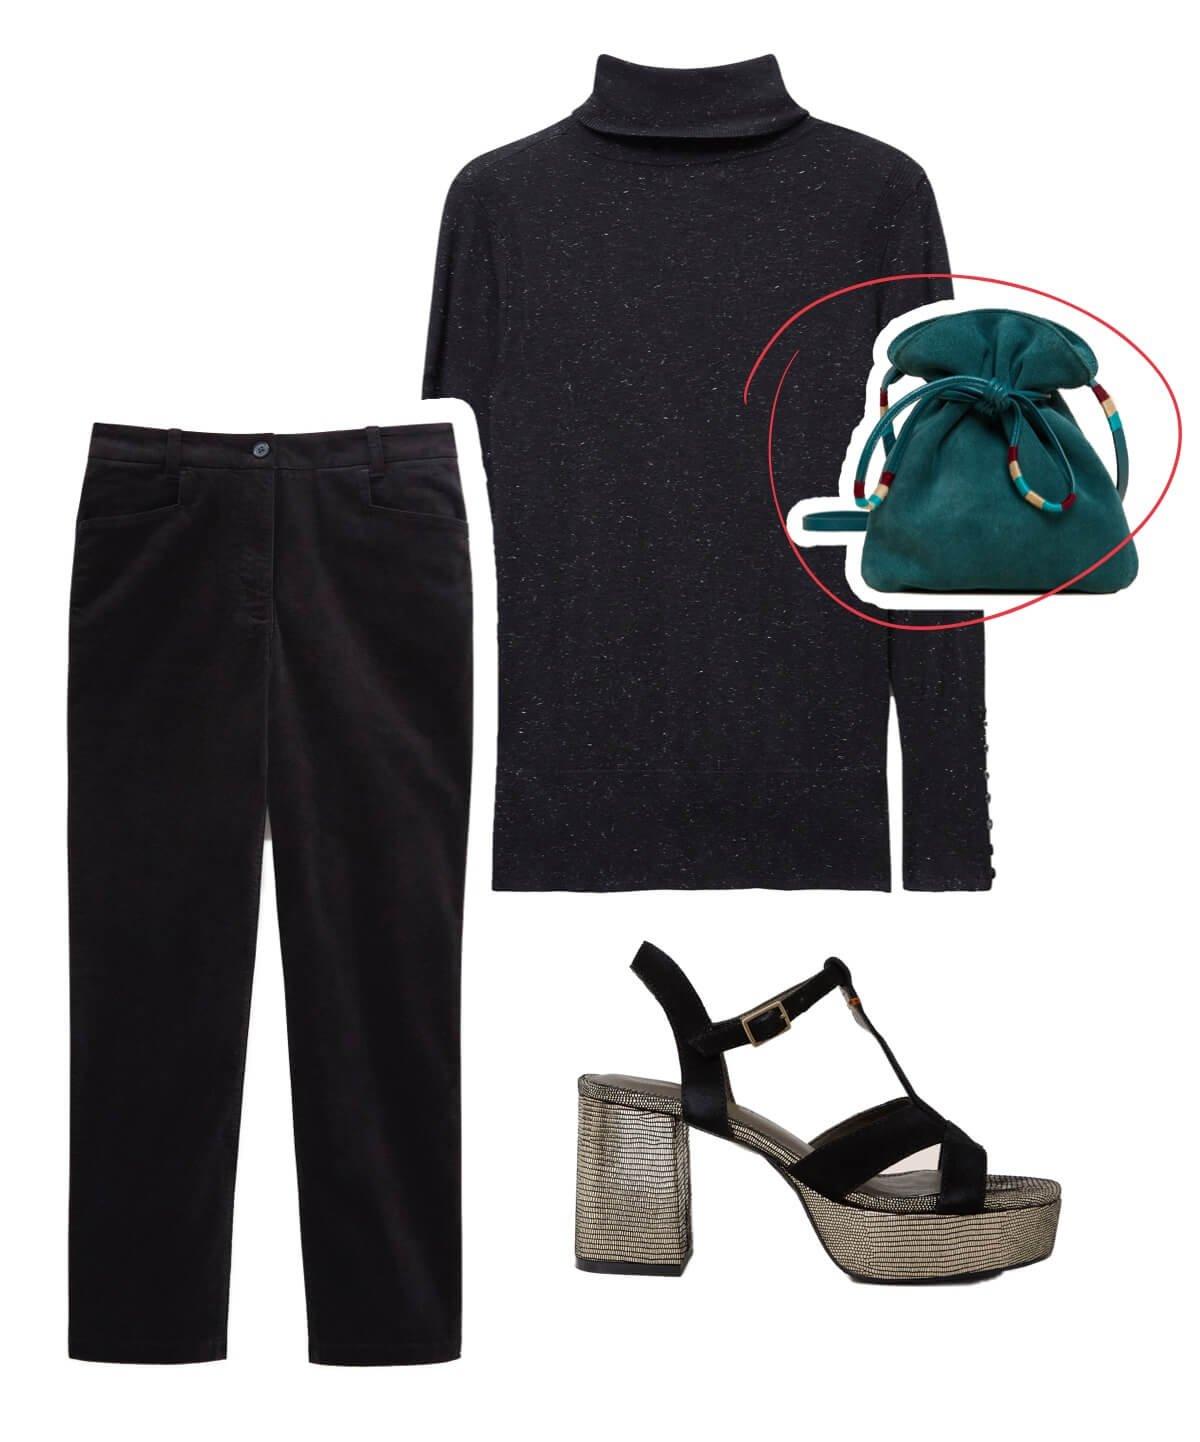 christmaspartywearguide_outfit2